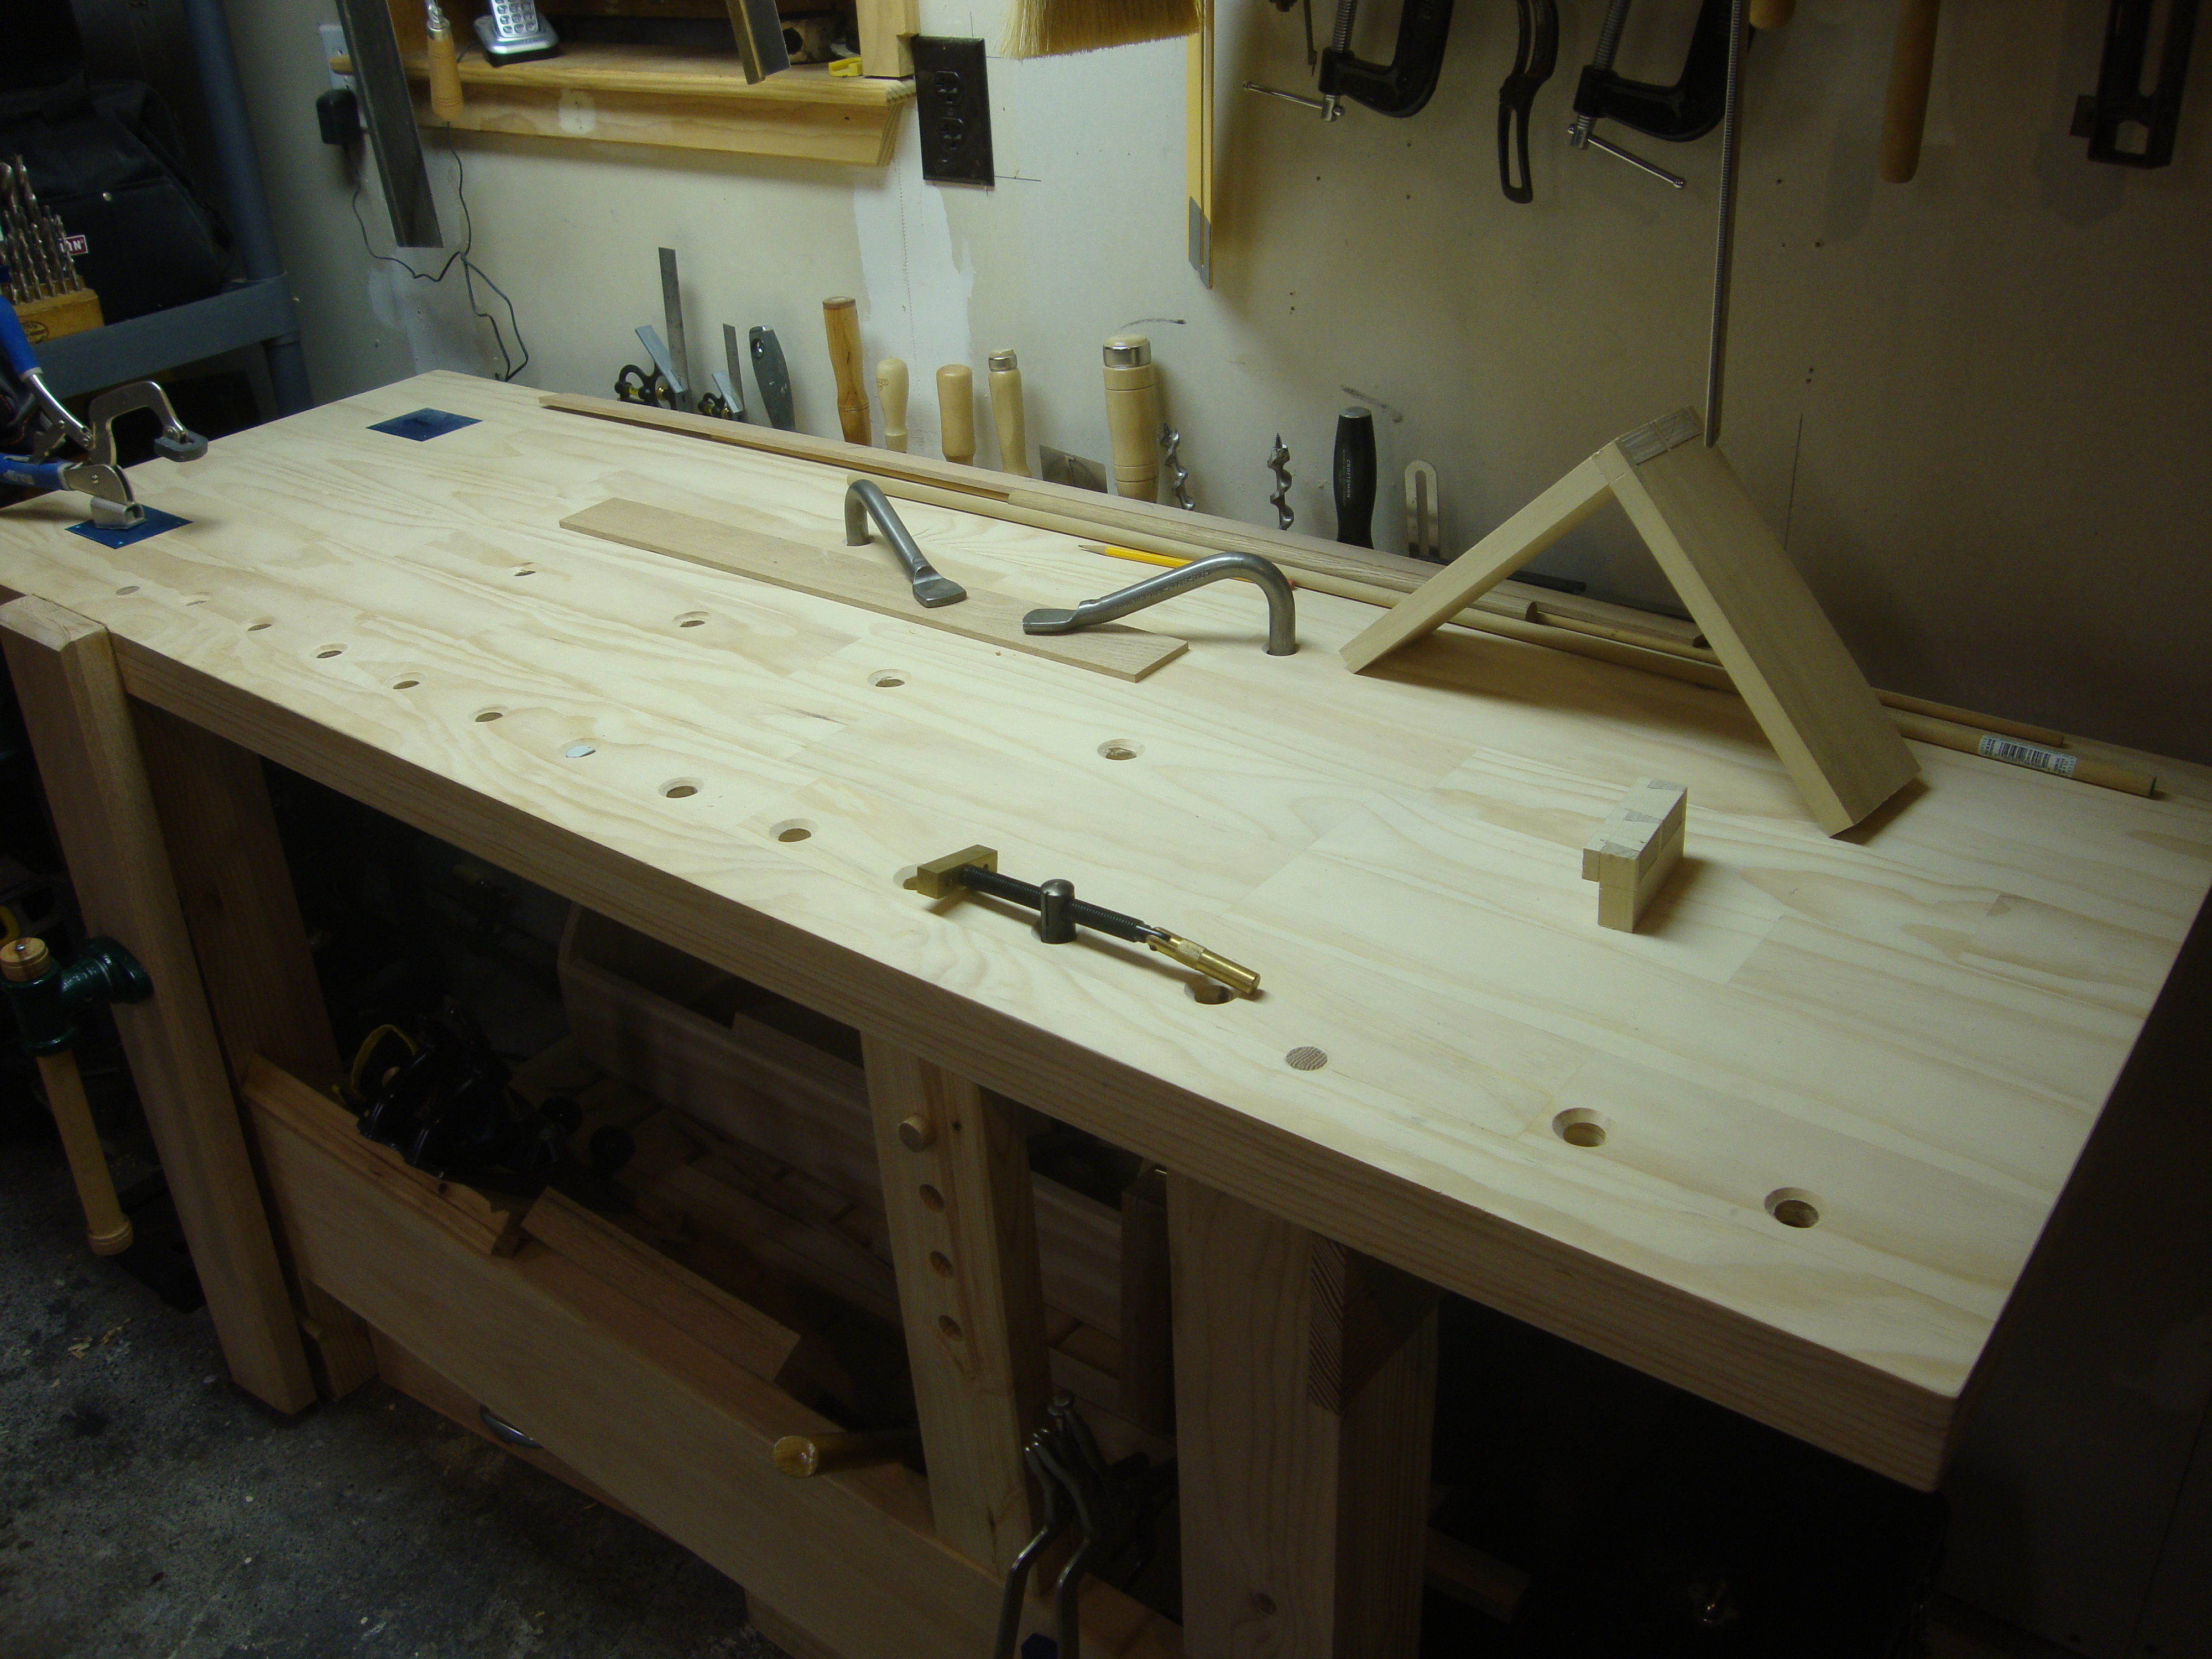 Building a workbench, Building a hobby « The Slightly Confused 